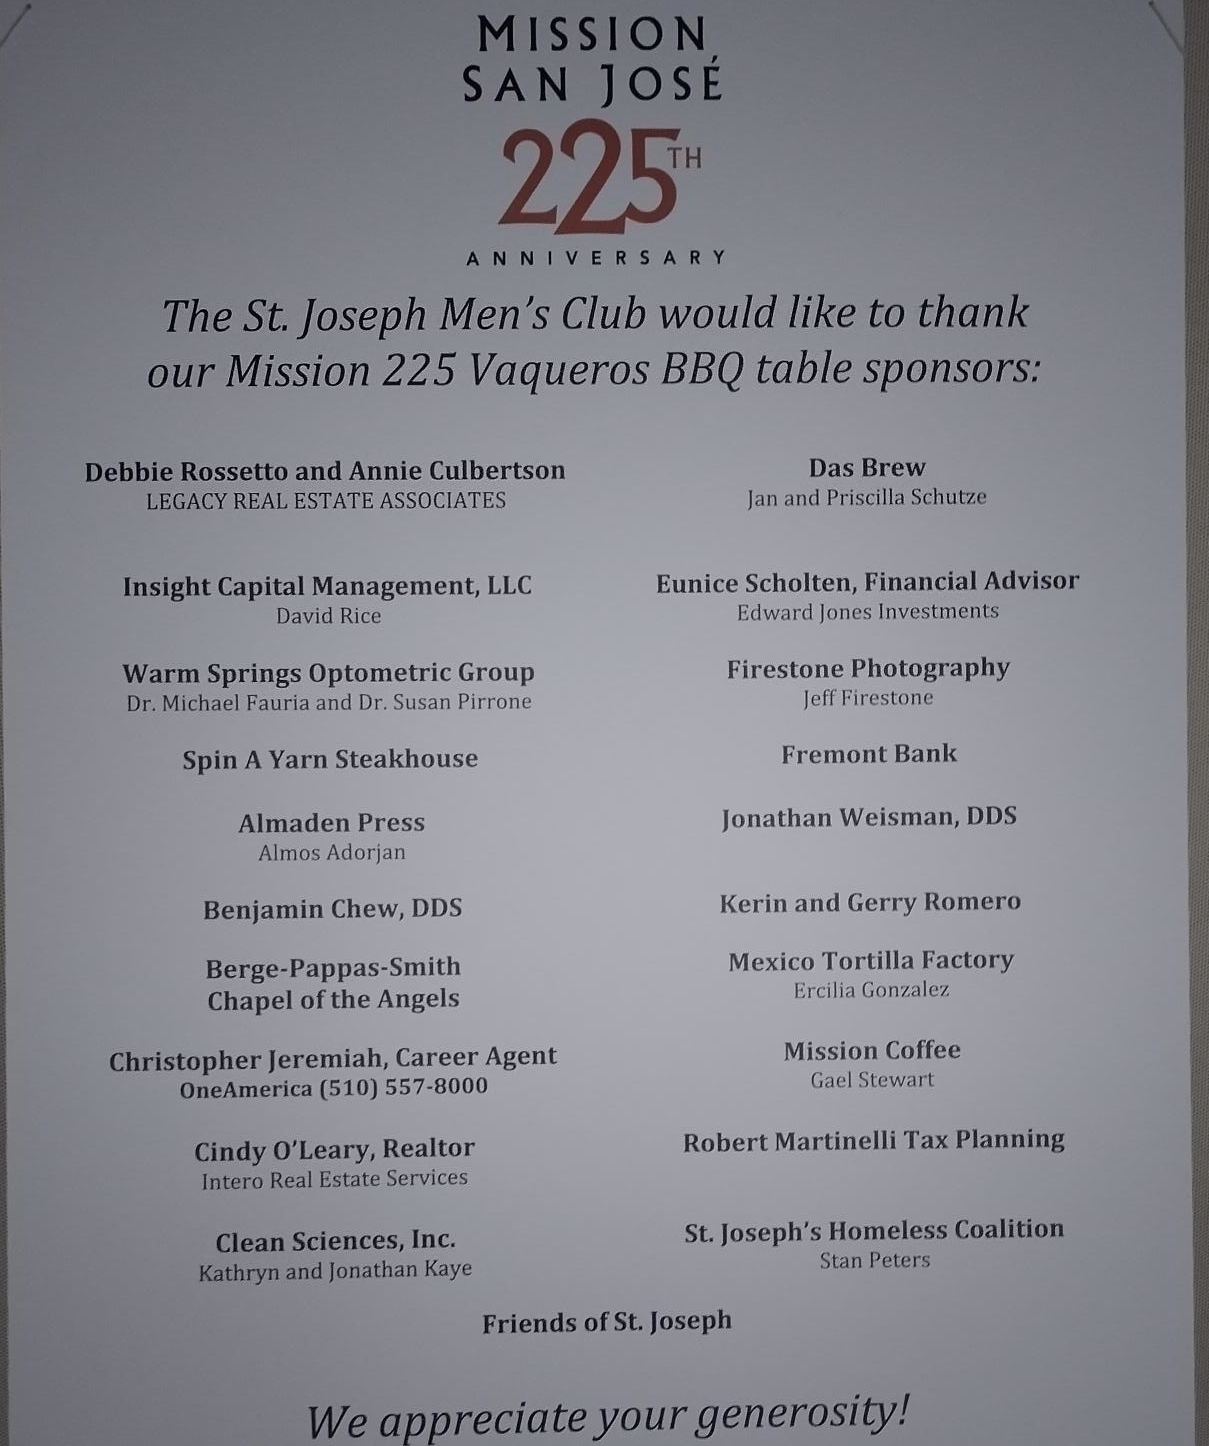 The St. Joseph Men’s Club would like to thank our Mission 225 Vaqueros BBQ table sponsors